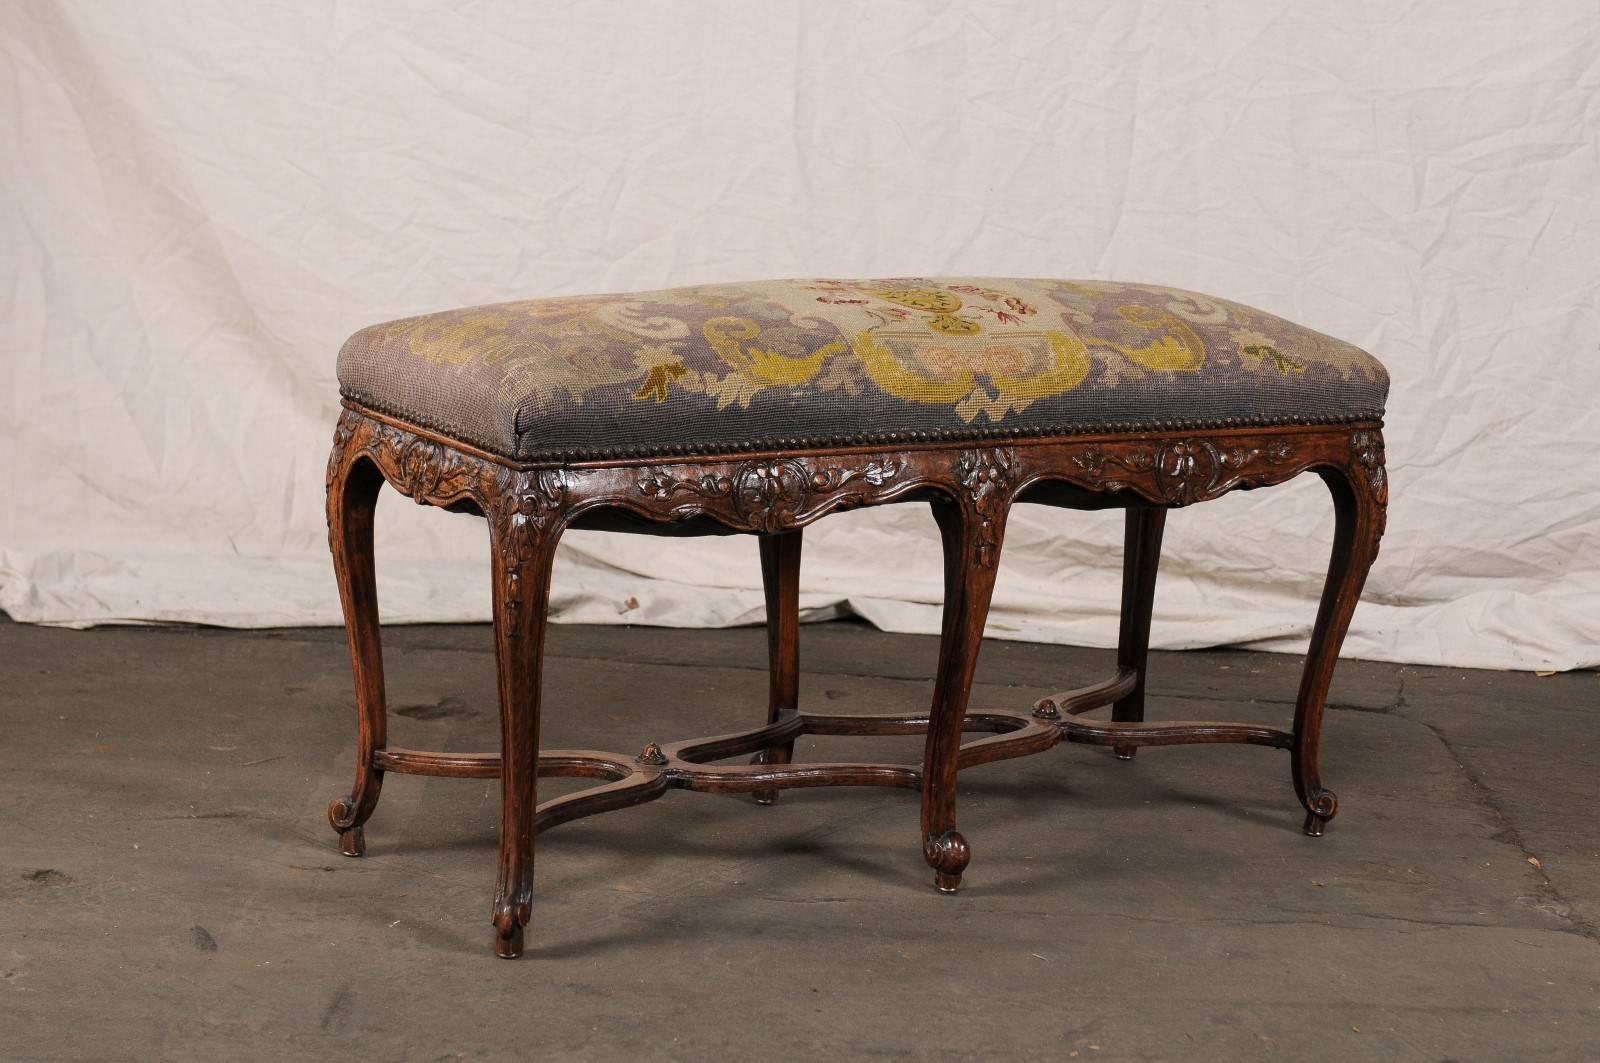 Wood 19th-20th Century French Louis XV Style Needlepoint Bench